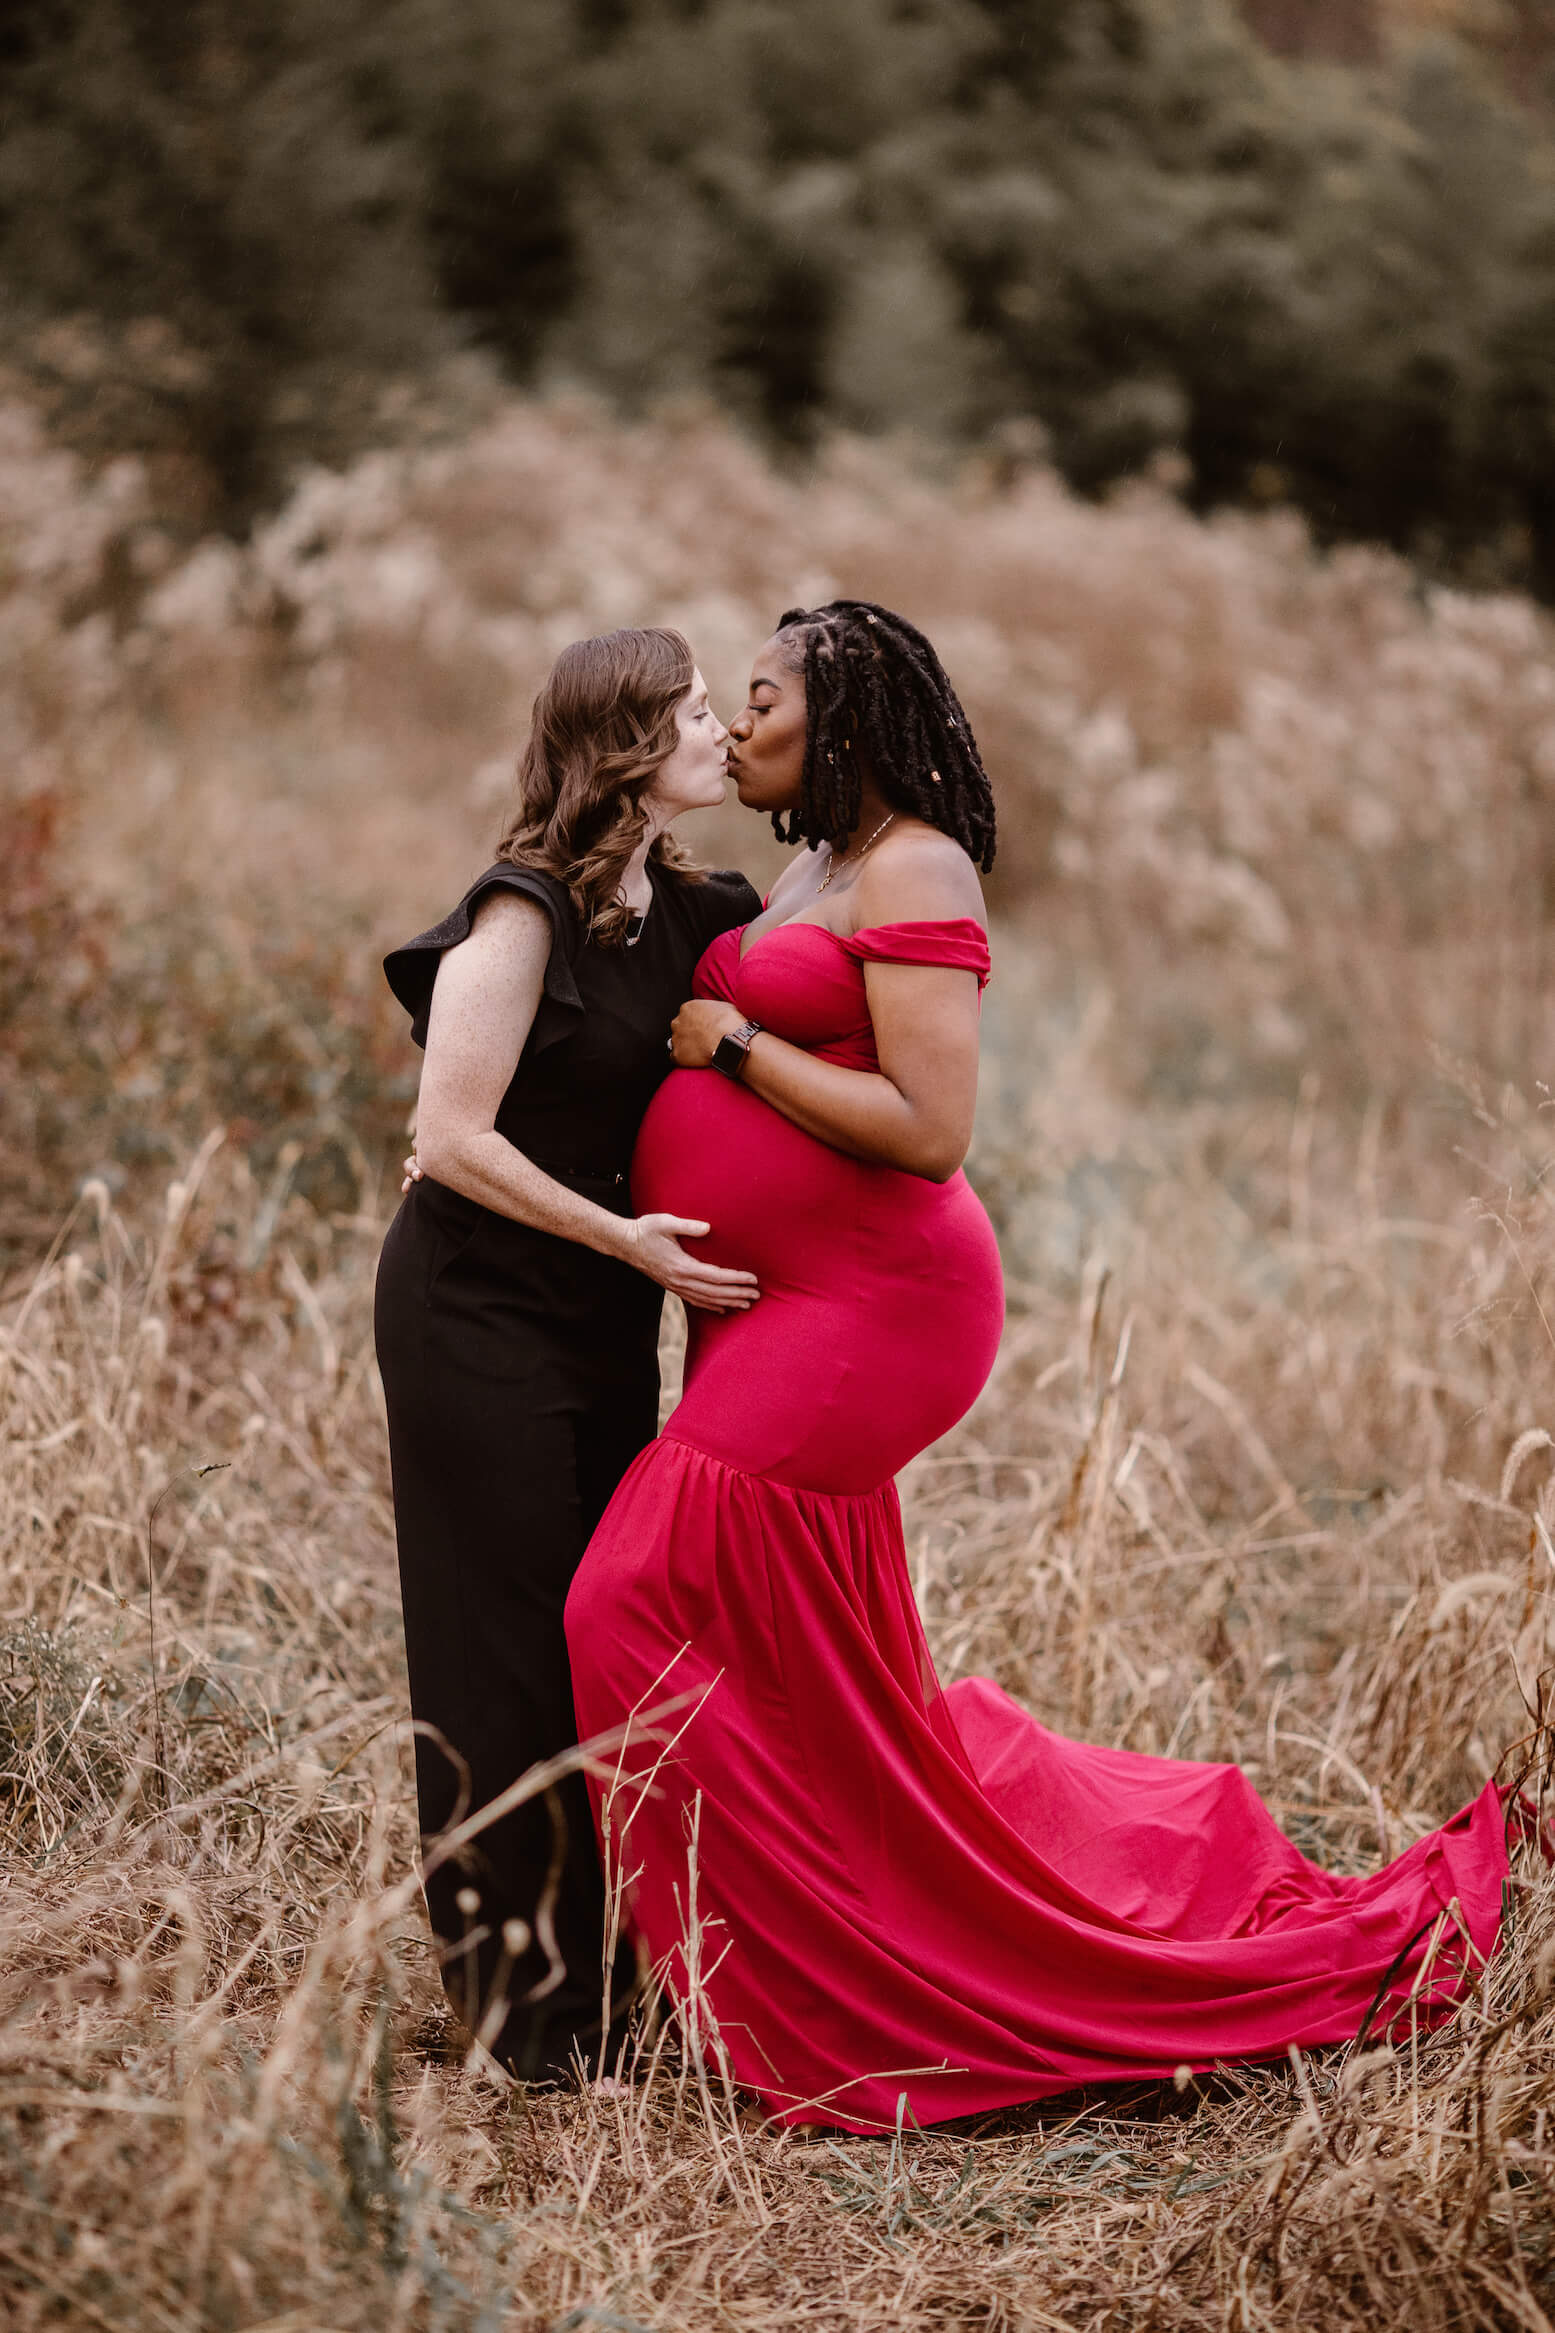 pregnant woman in red dress kissing woman in black dress